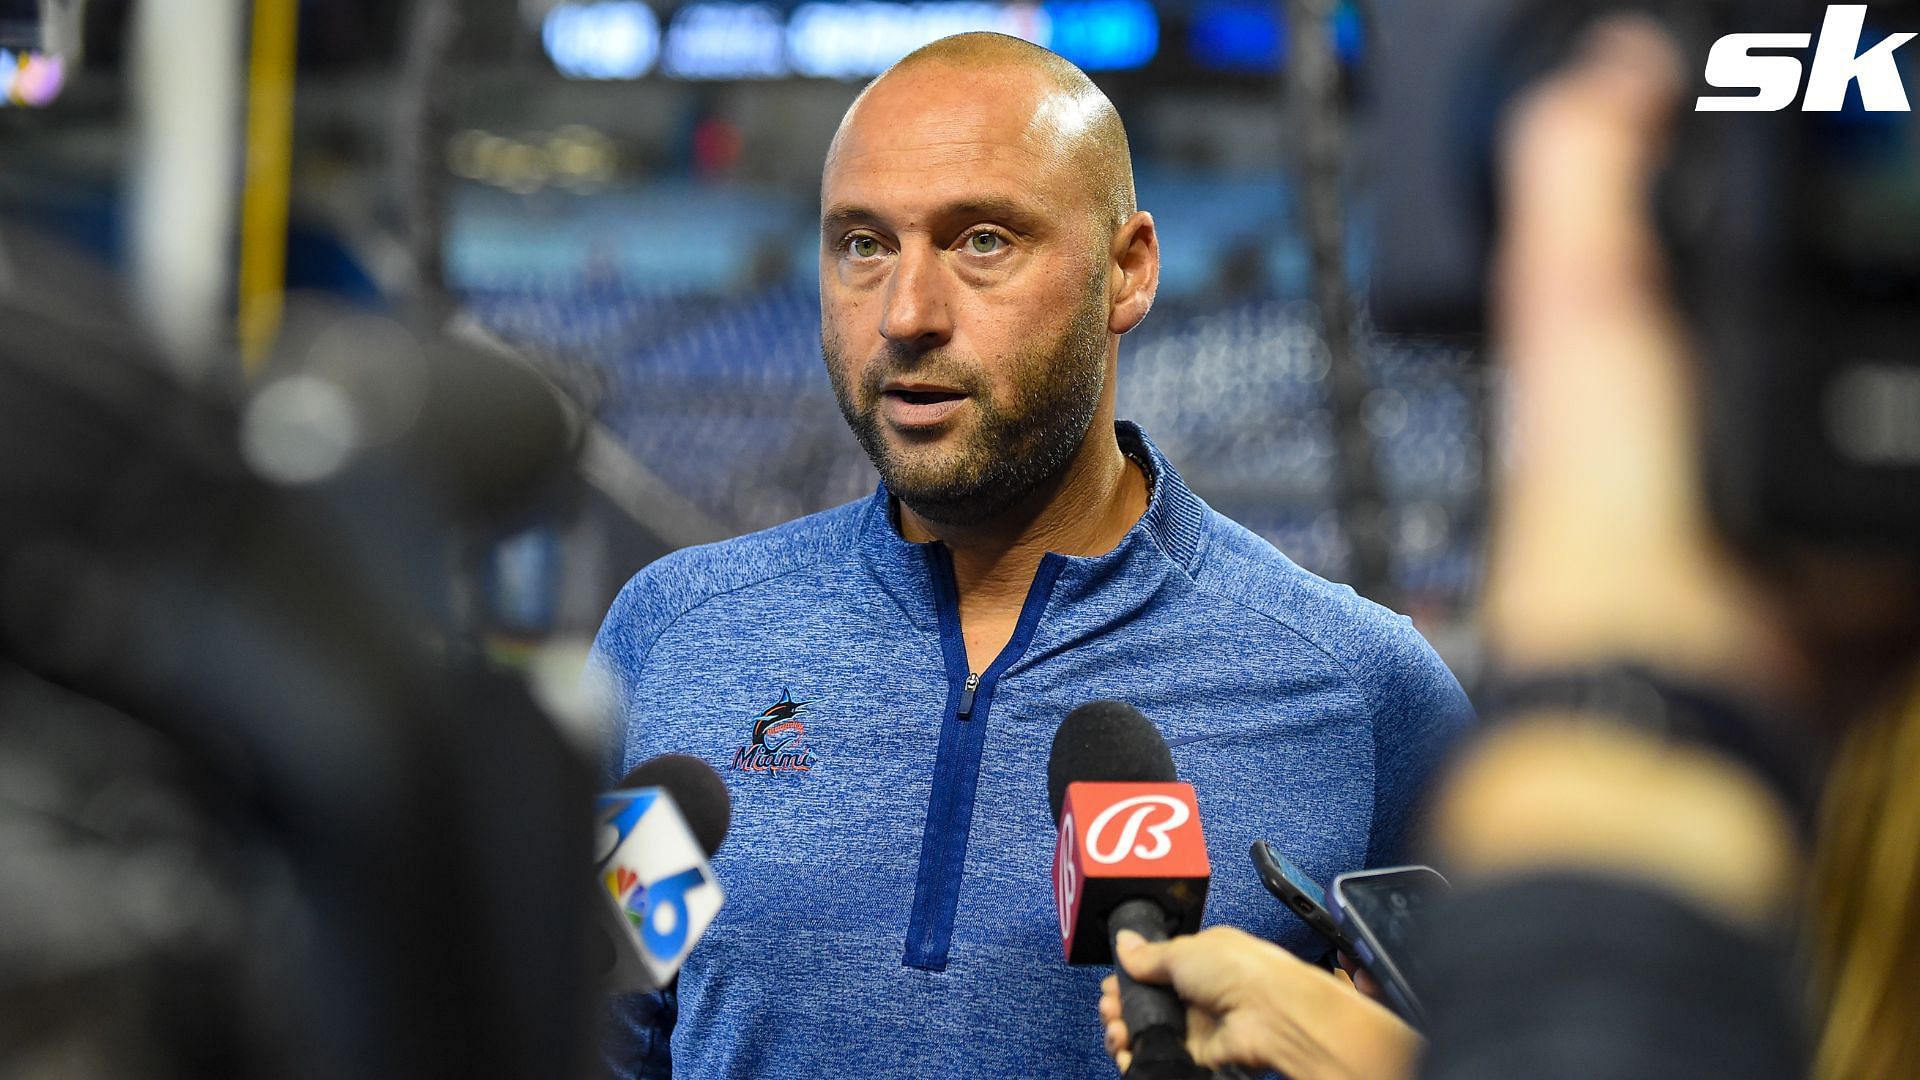 Derek Jeter saw a similarity between the 2018 Astros scandal and the infamous steroid era in MLB